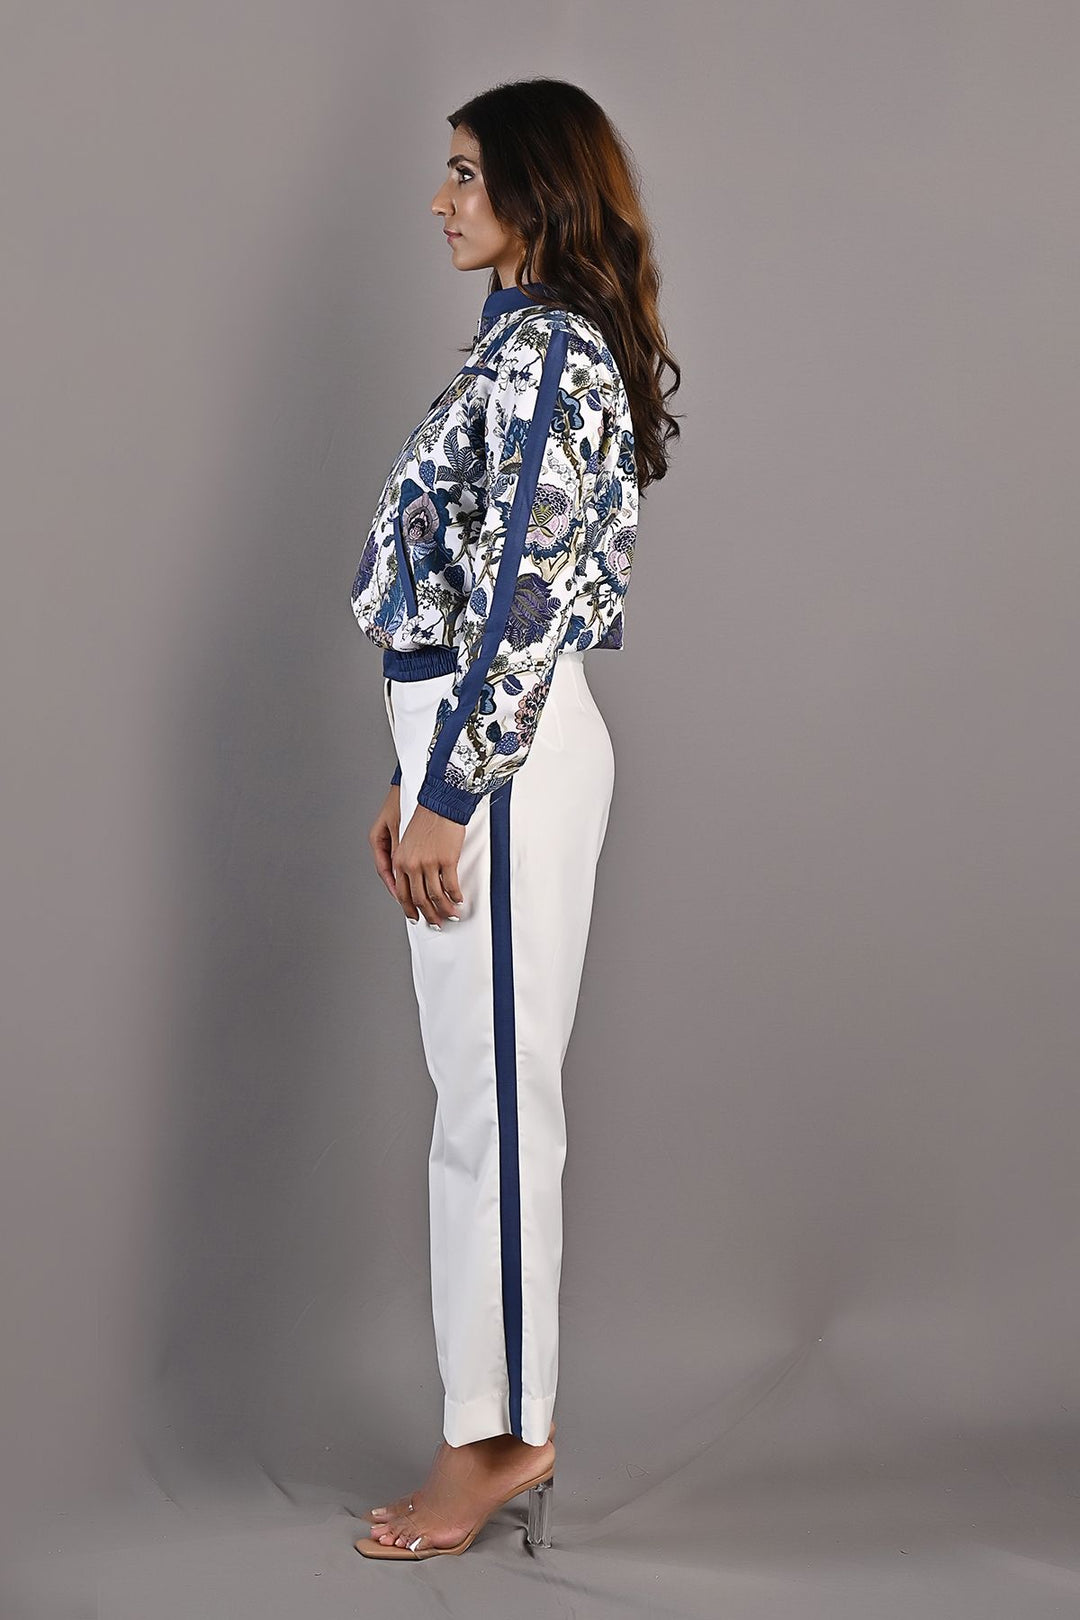 Magnolia- Printed Bomber Jacket Set with Off White Bell Bottoms